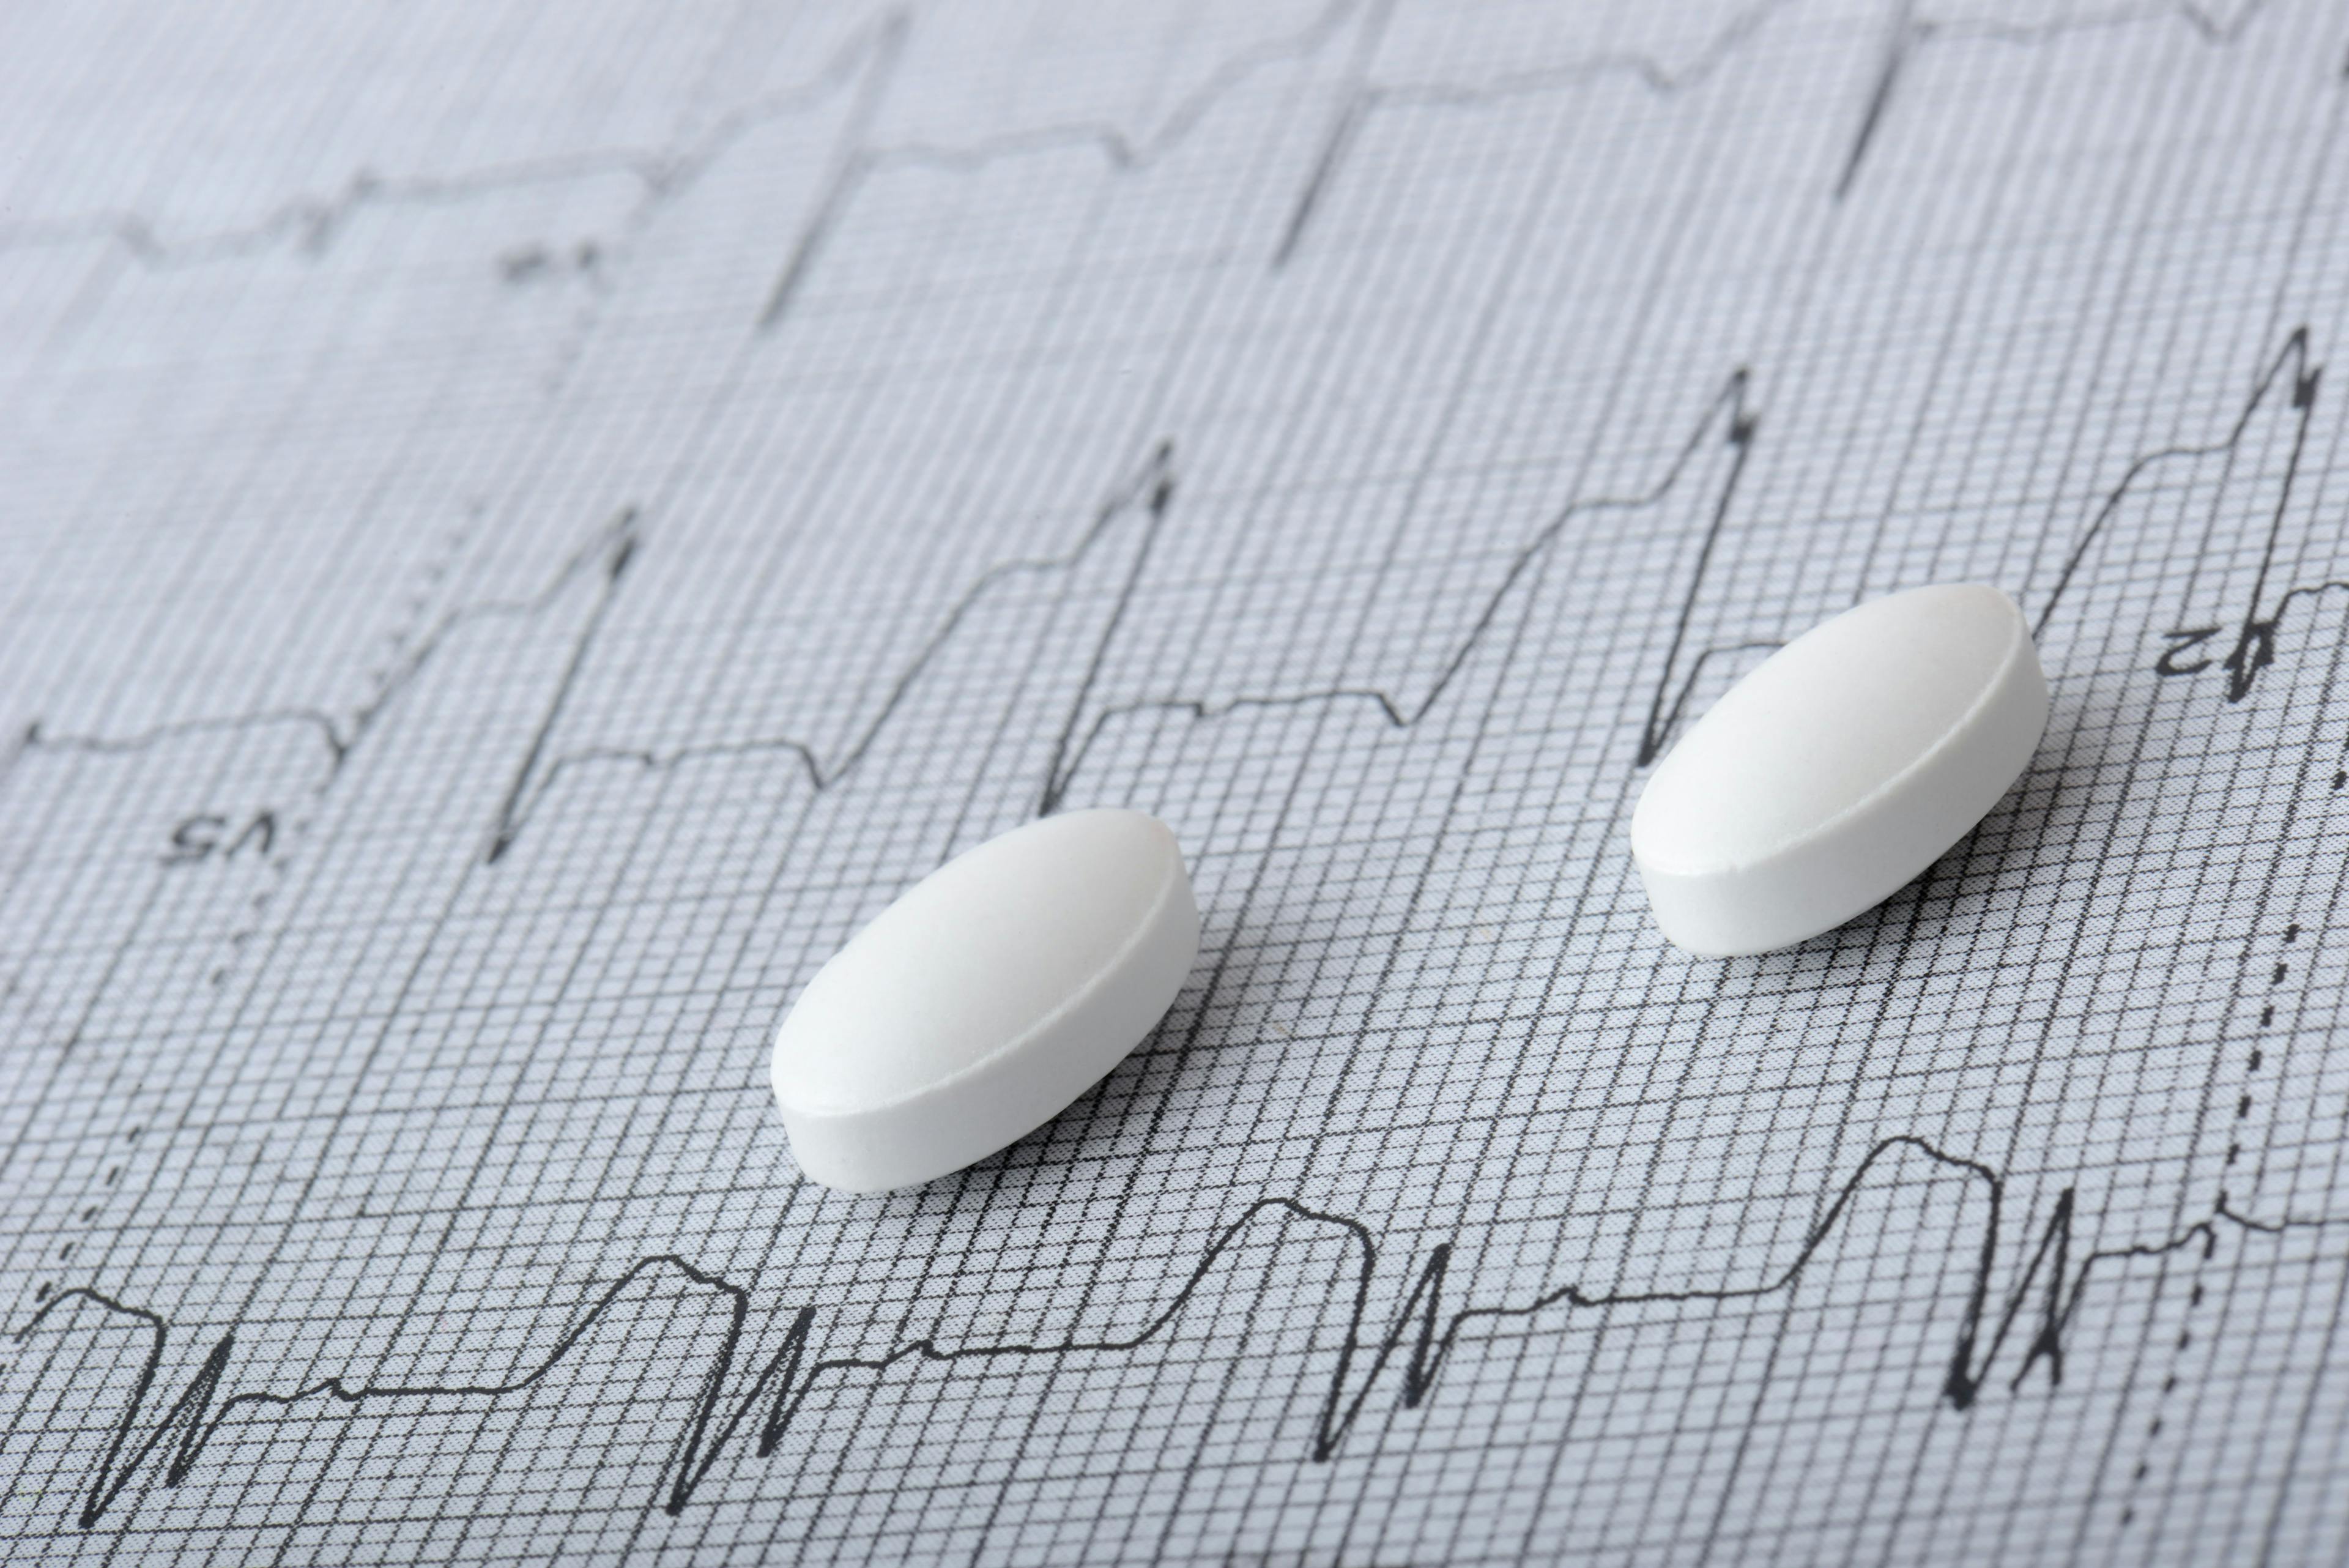 Study: Statin Therapy Shows Link to Reduction of All-Cause, Cardiovascular Death